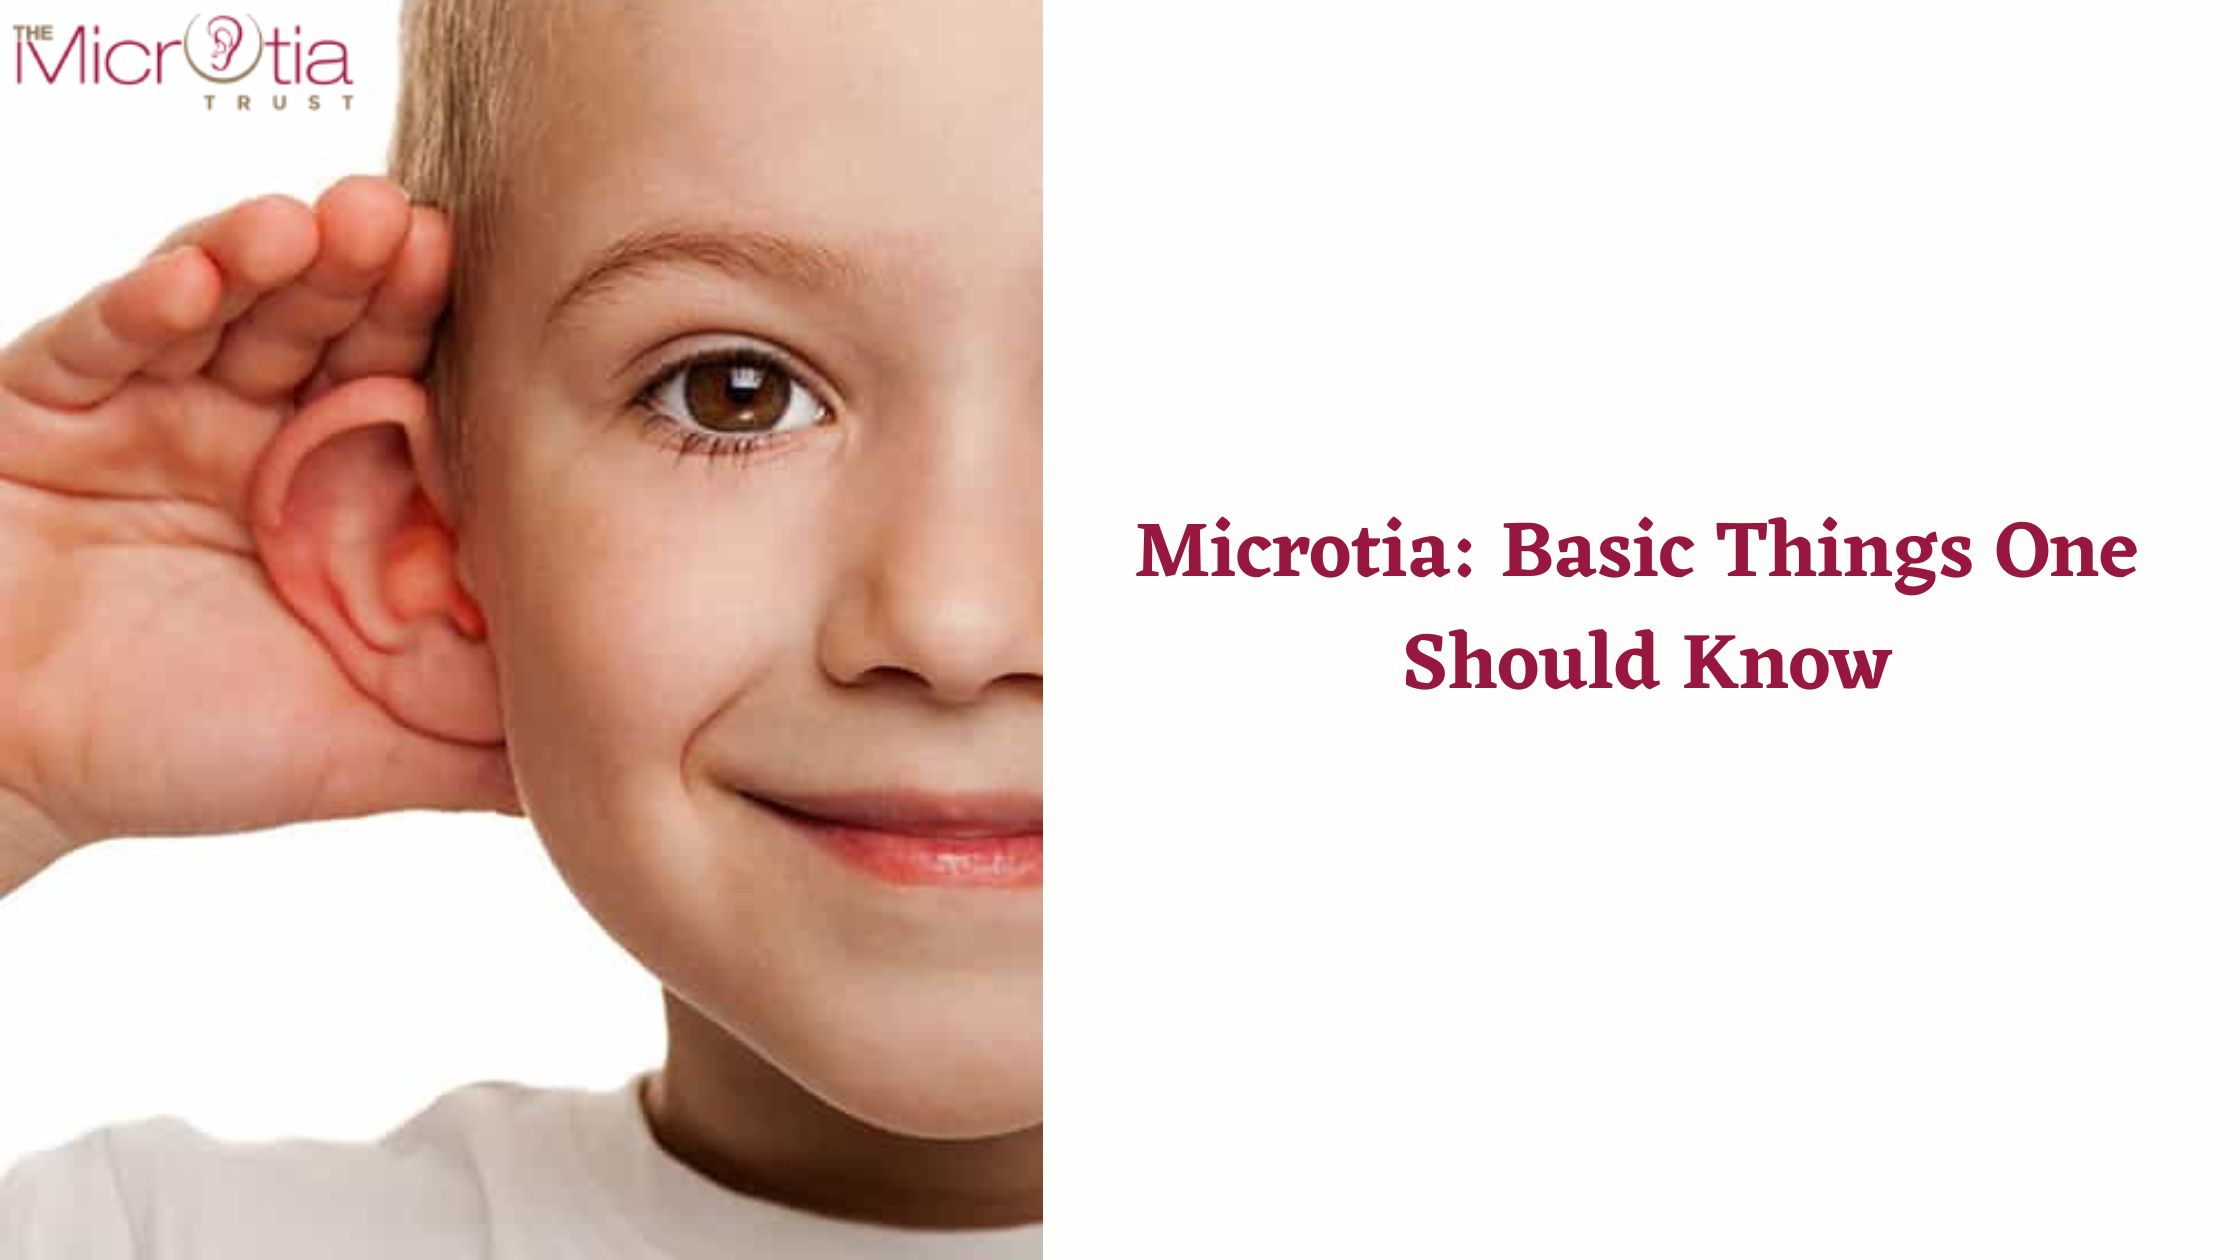 Microtia Basic Things One Should Know-0b7967dc